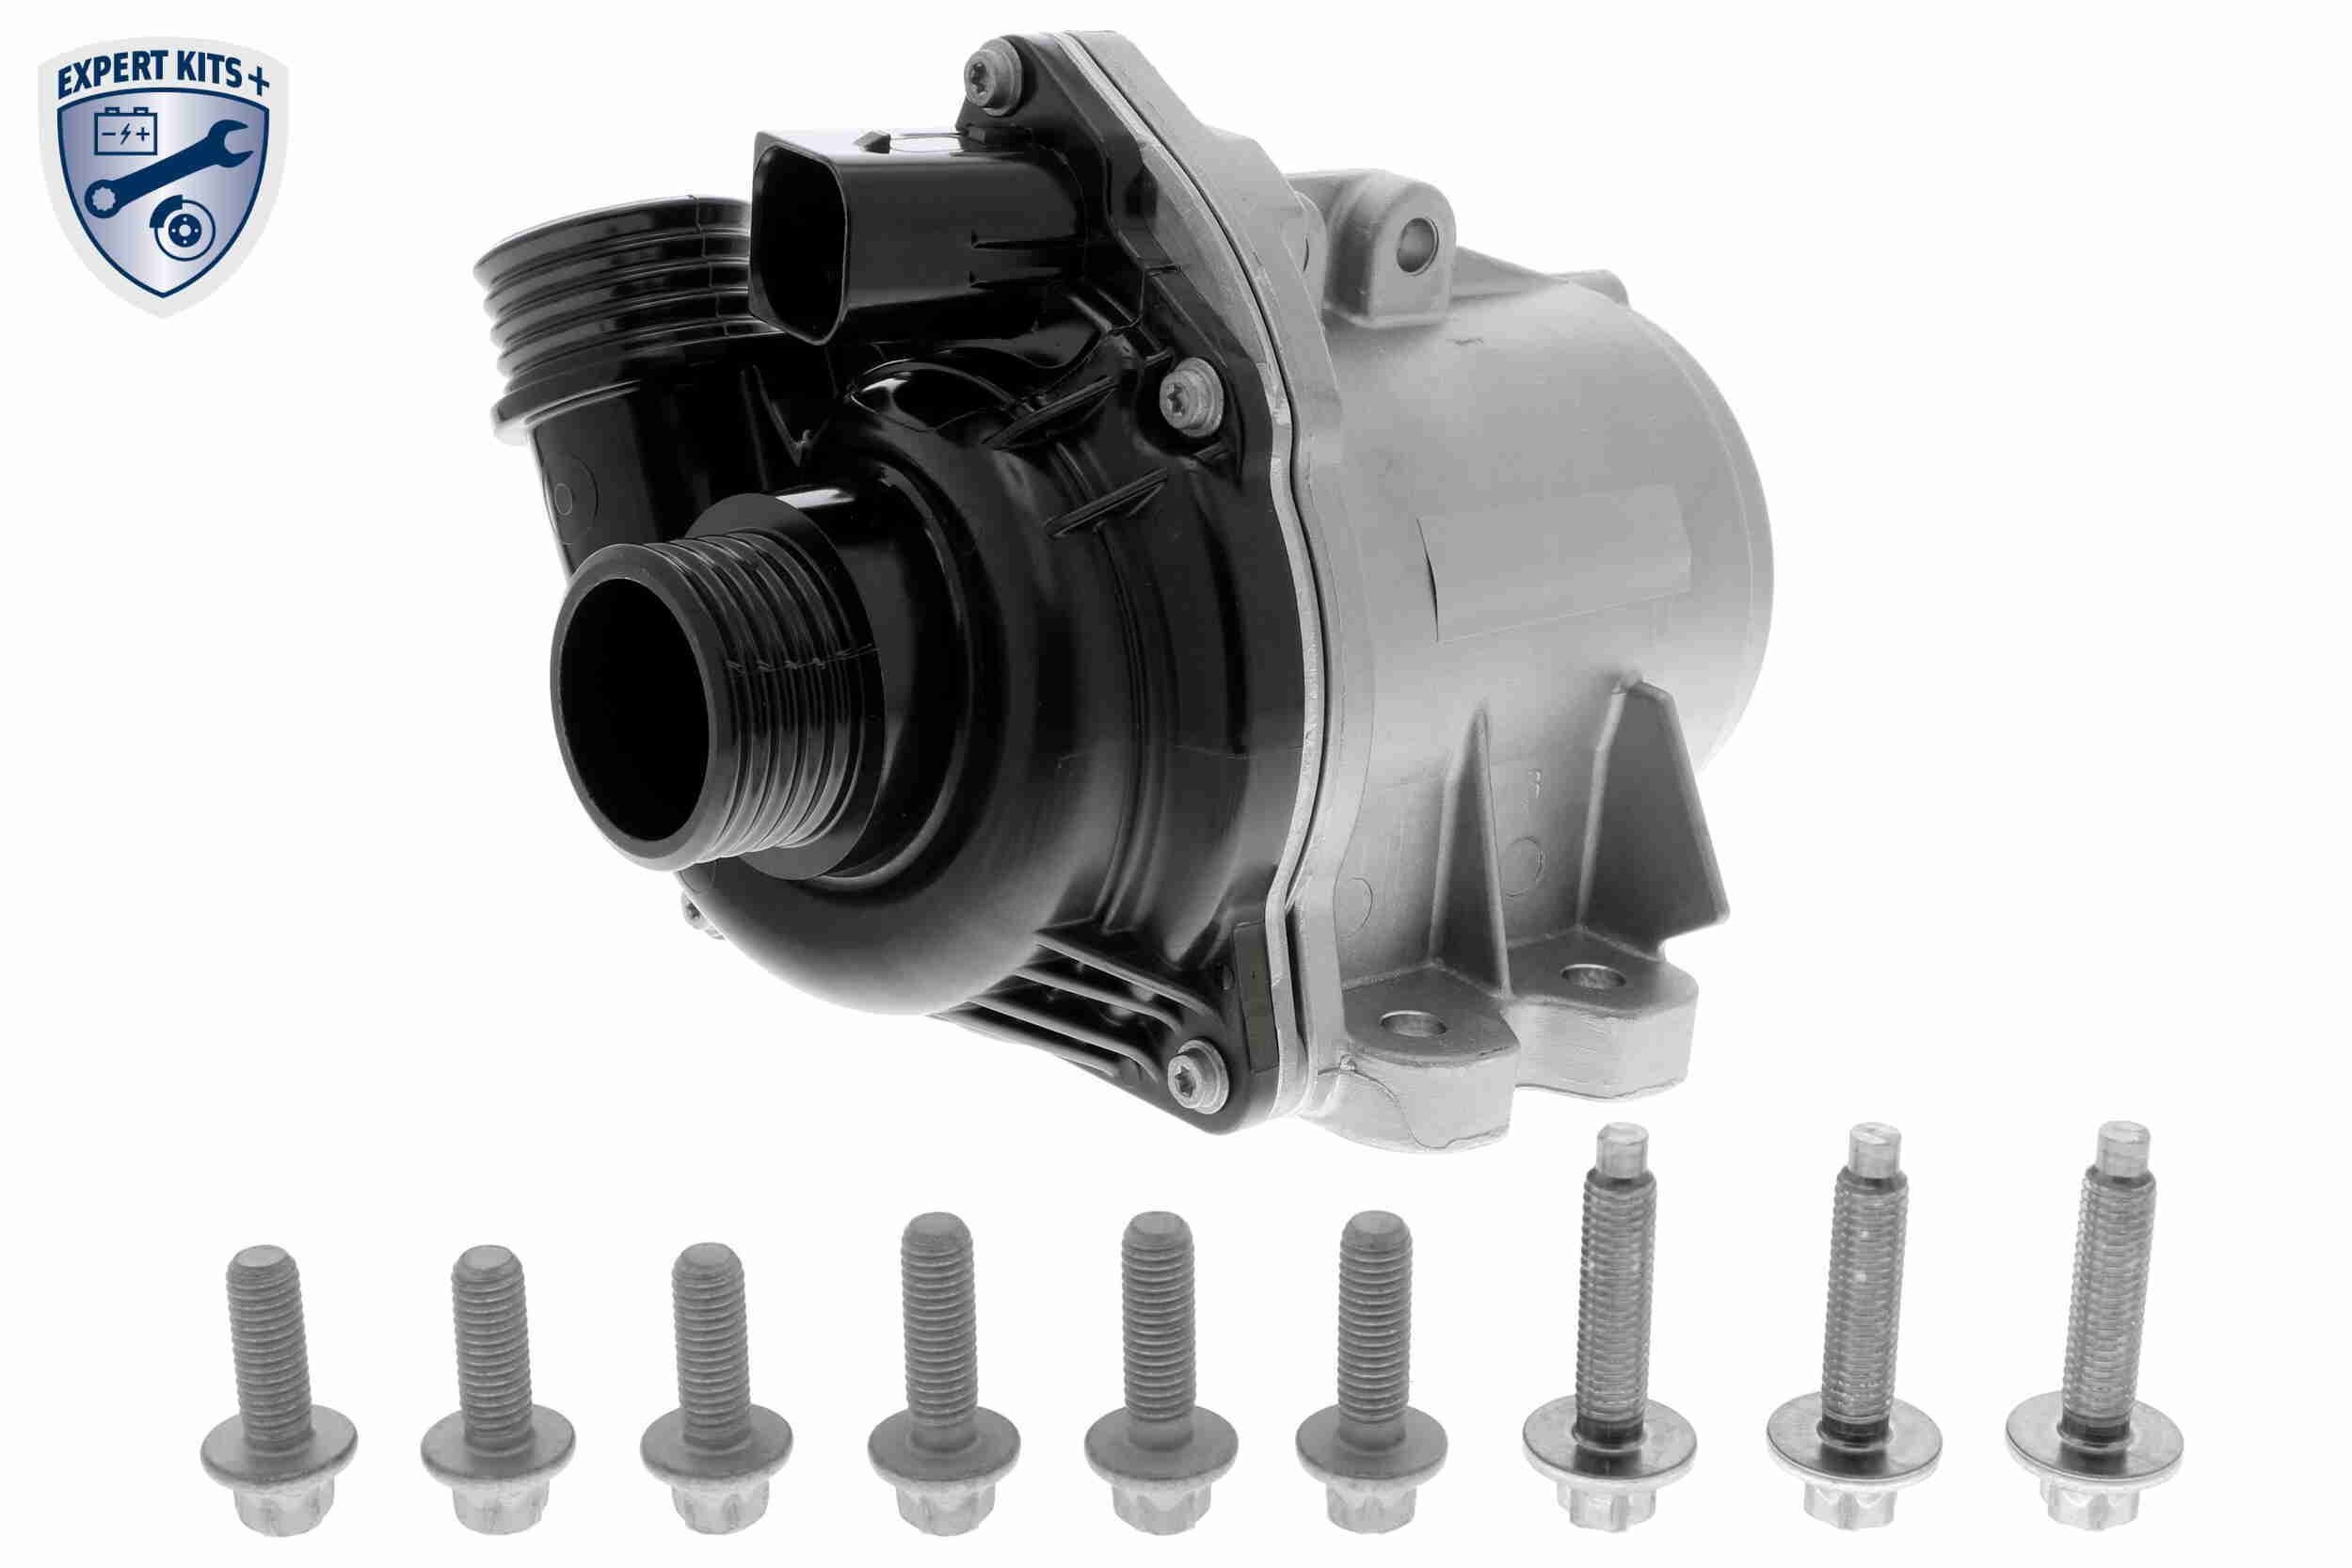 VEMO V20-16-0004-1 Water pump with accessories, with bolts/screws, Electric, Q+, original equipment manufacturer quality MADE IN GERMANY